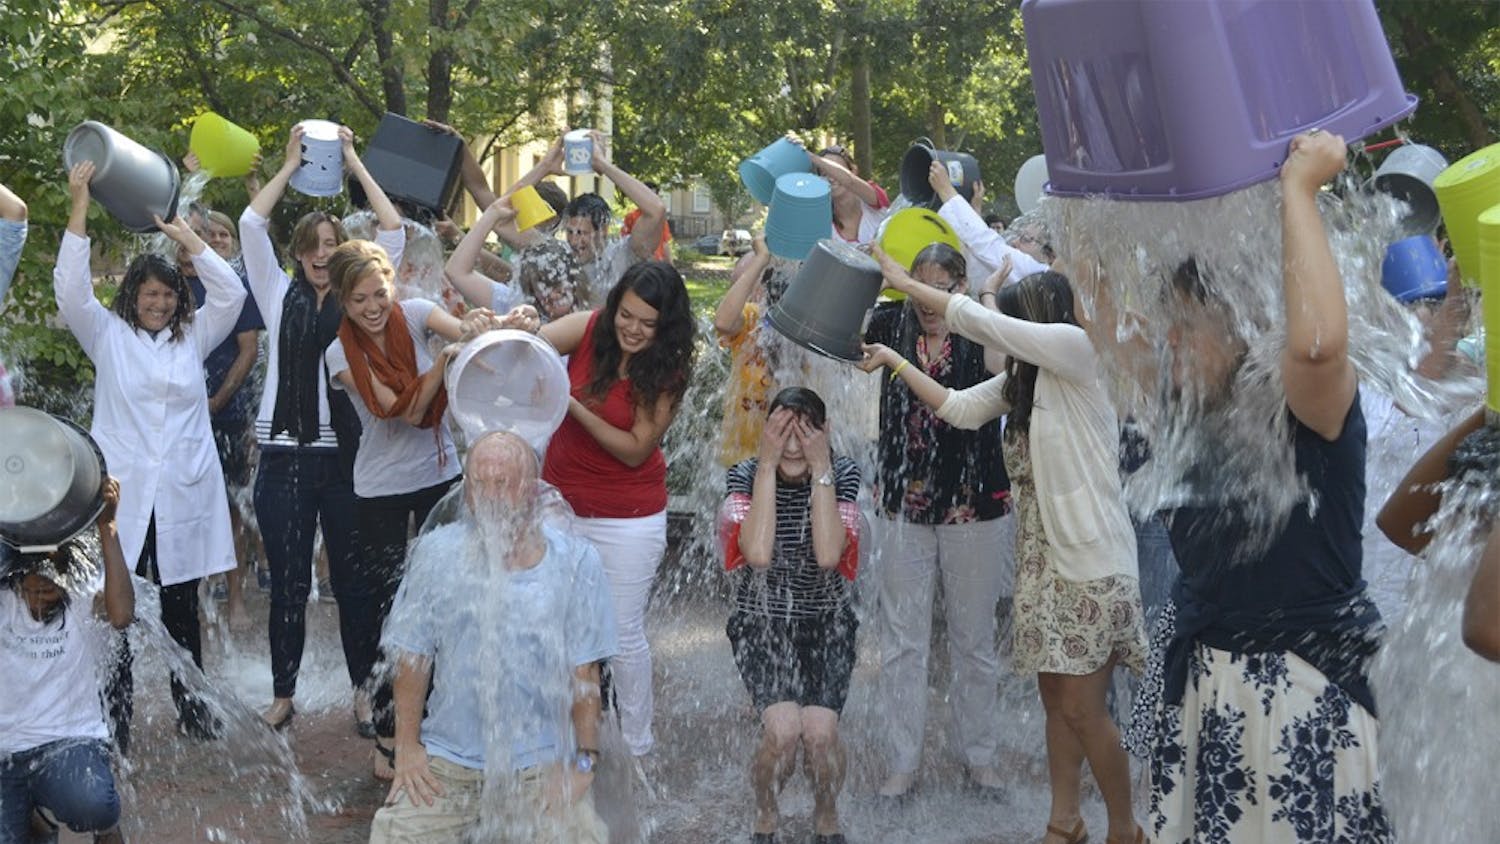 Individuals come together Wednesday afternoon outside of Davie Hall to complete the ALS ice bucket challenge in honor of a psychology professor who was recently diagnosed with ALS.